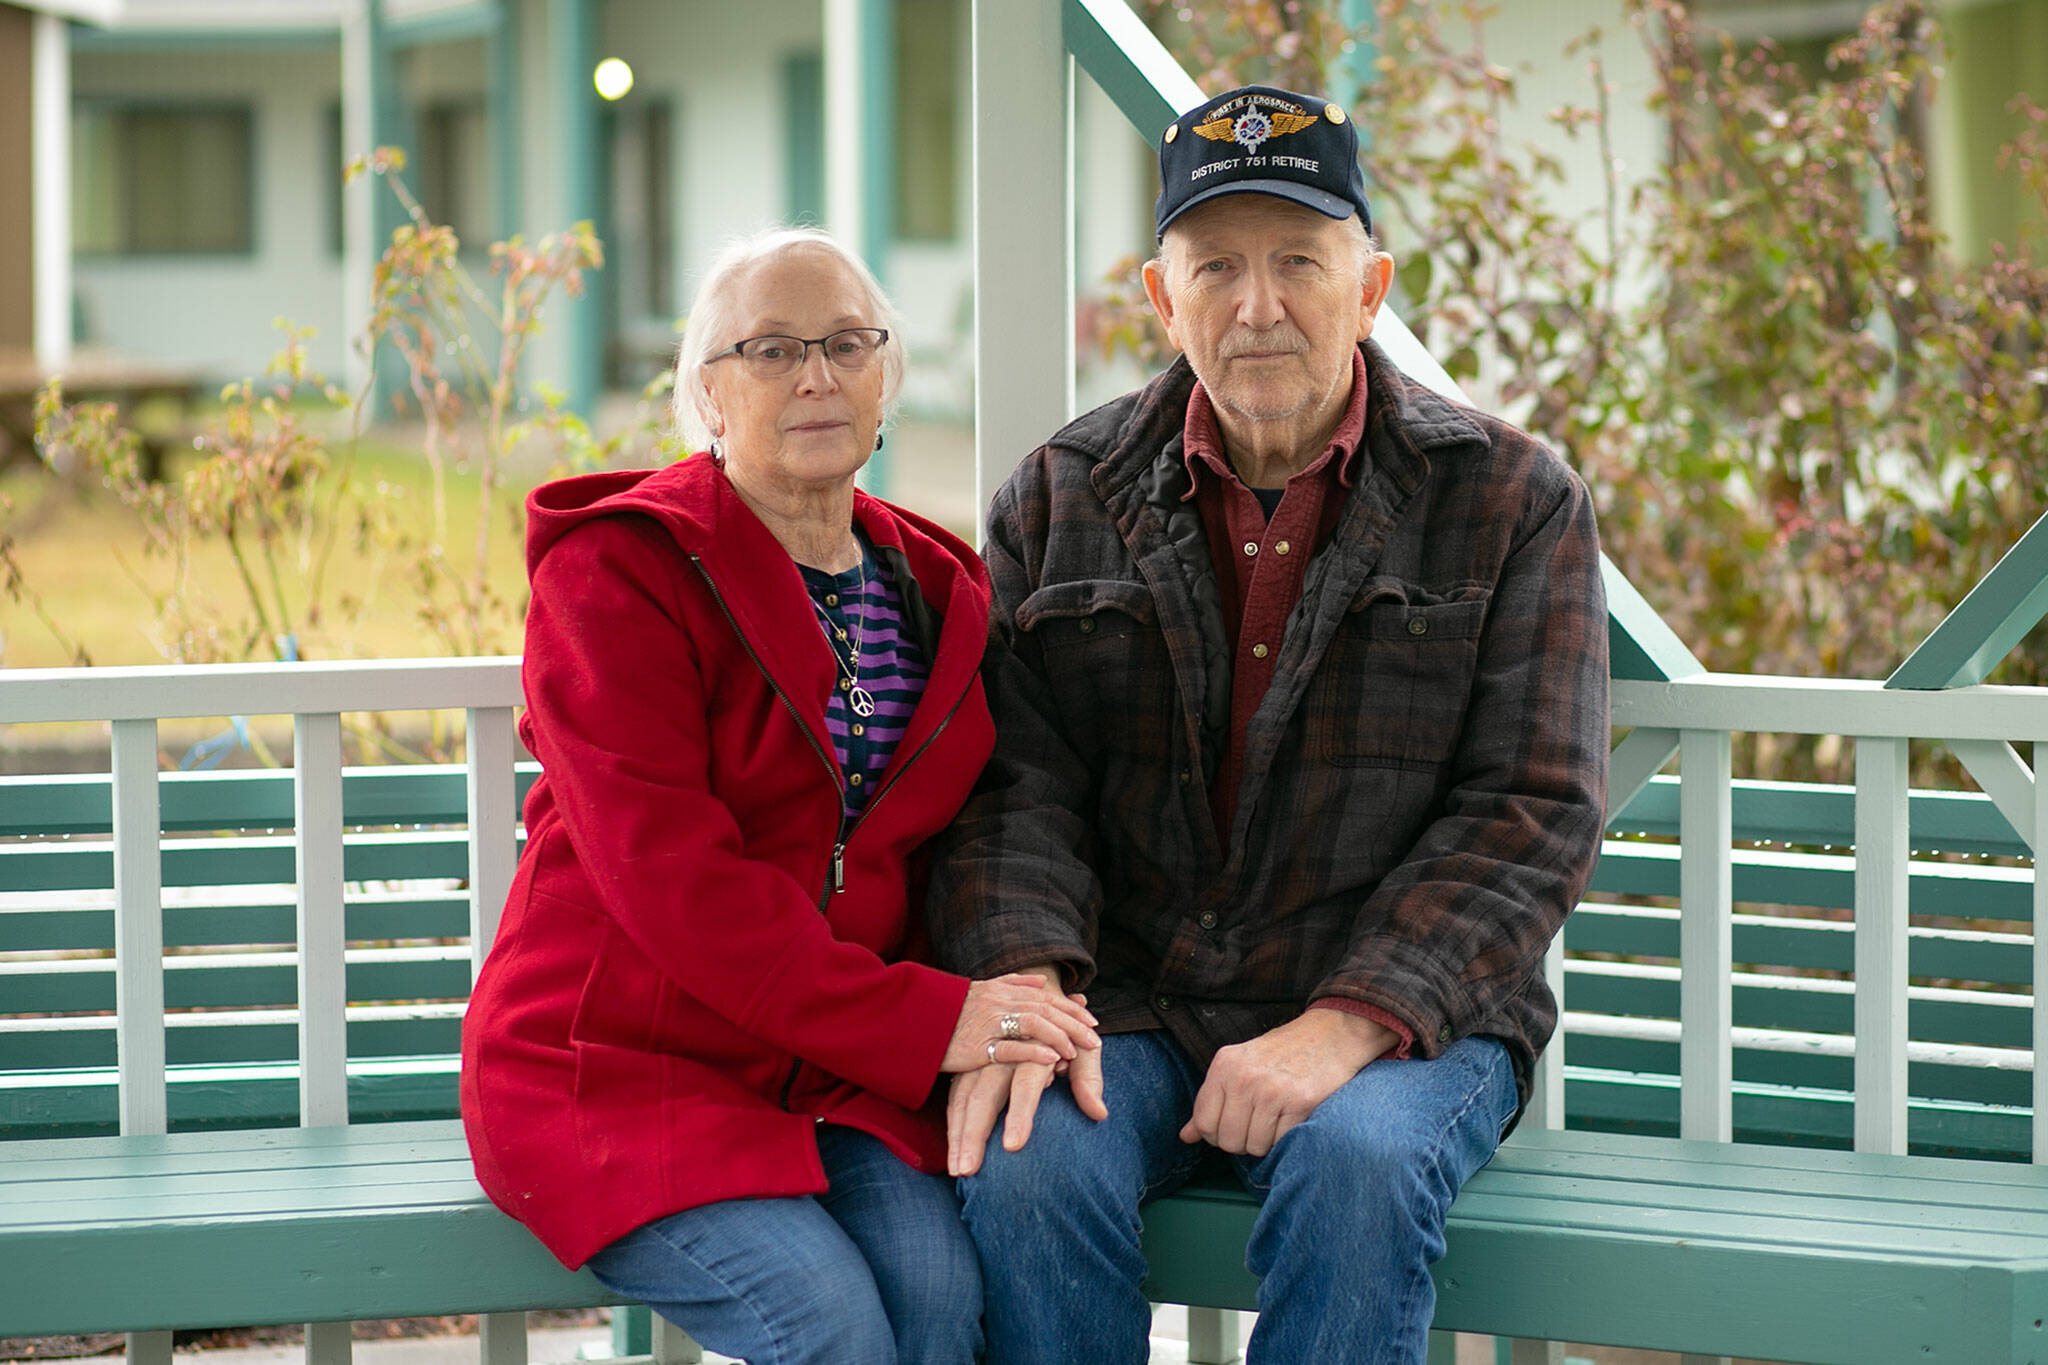 Jo Ford, 74, and her husband Bernard Ford, 80, sit together beneath a gazebo at the Stilly Valley Center on Saturday, Jan. 7, 2023, in Arlington, Washington. The couple has been married for 52 years and have both received medical care from The Everett Clinic for most of their lives. They are now looking for other care providers because of confusing and incorrect information from the clinic during its ongoing contract dispute with Regence over Medicare Advantage plans. (Ryan Berry / The Herald)